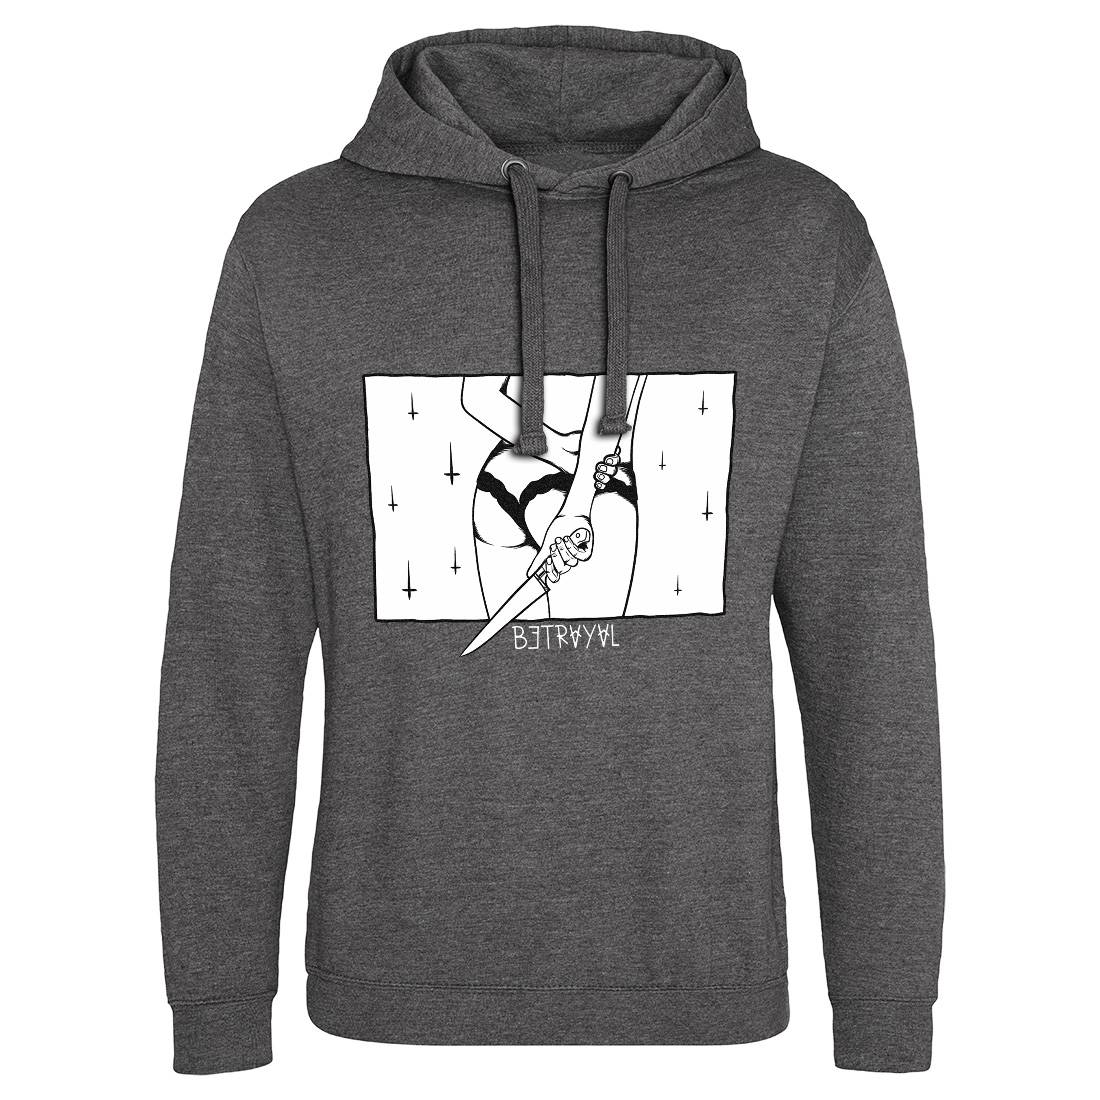 Betrayal Mens Hoodie Without Pocket Horror D444